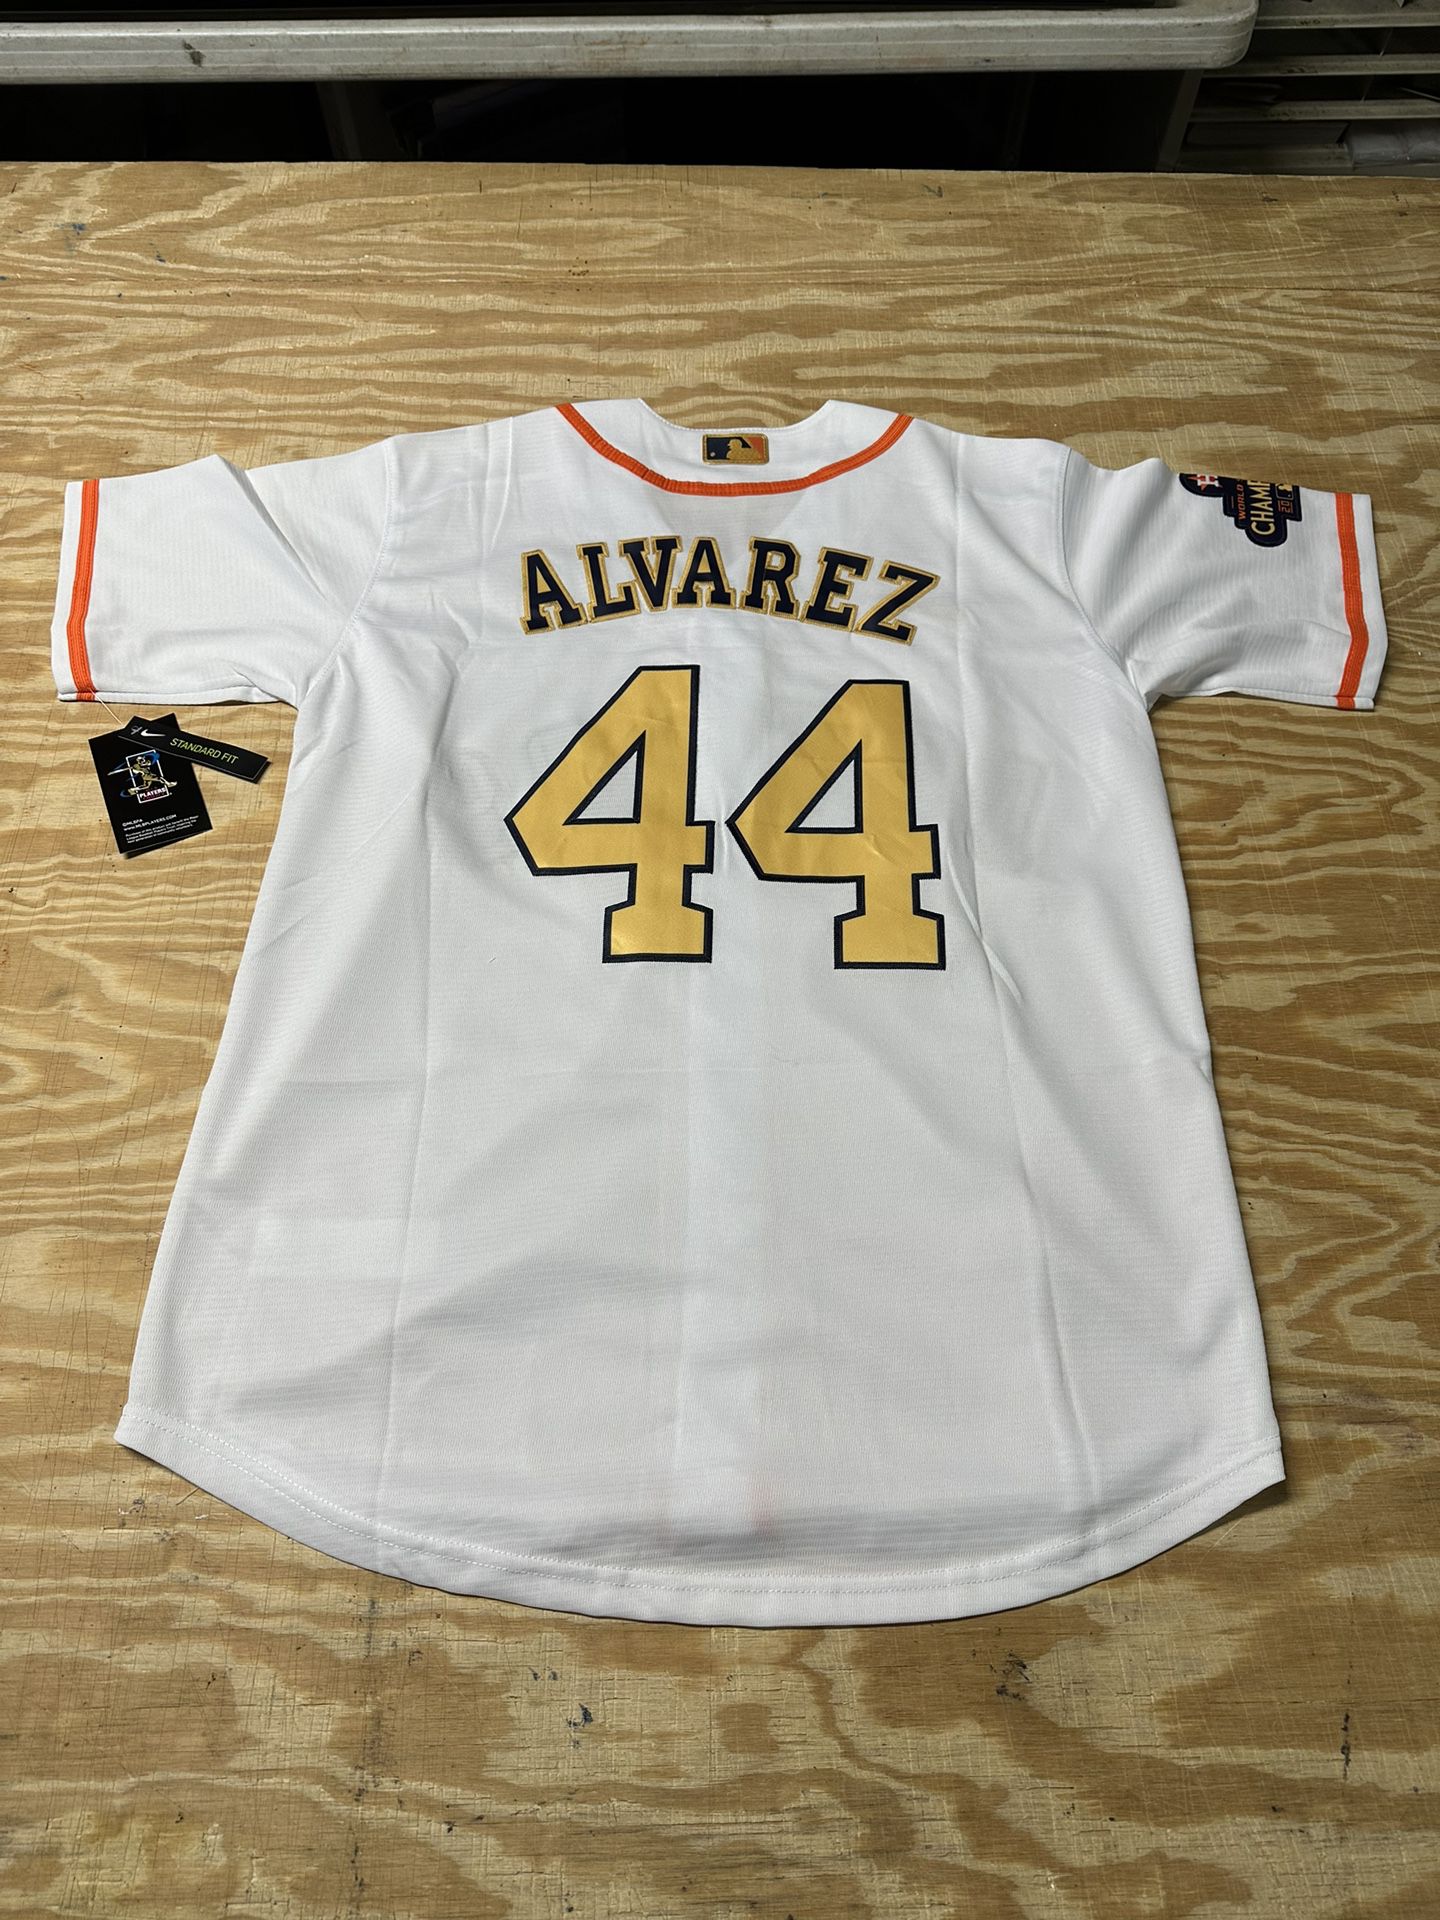 Houston Astros Gold Rush Jersey for Sale in Conroe, TX - OfferUp